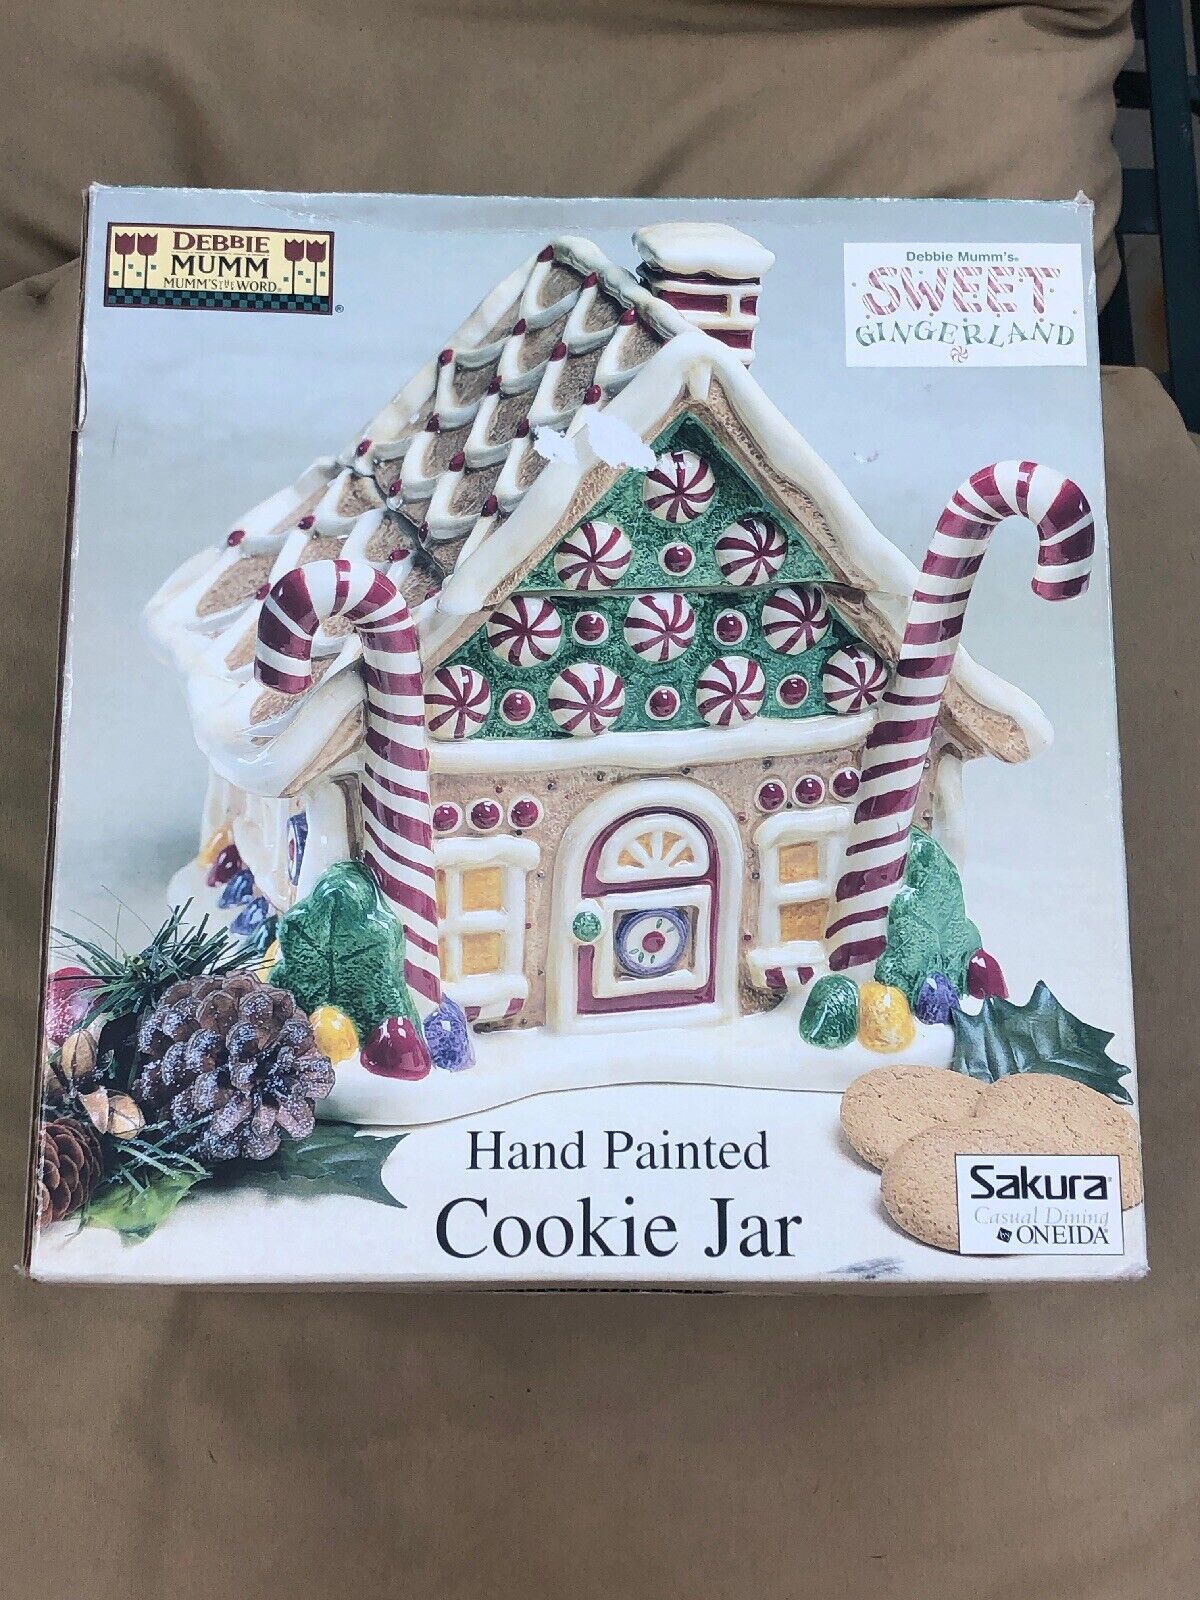 Debbie Mumm Cookie JAR sweet Gingerland and hand painted New In Box